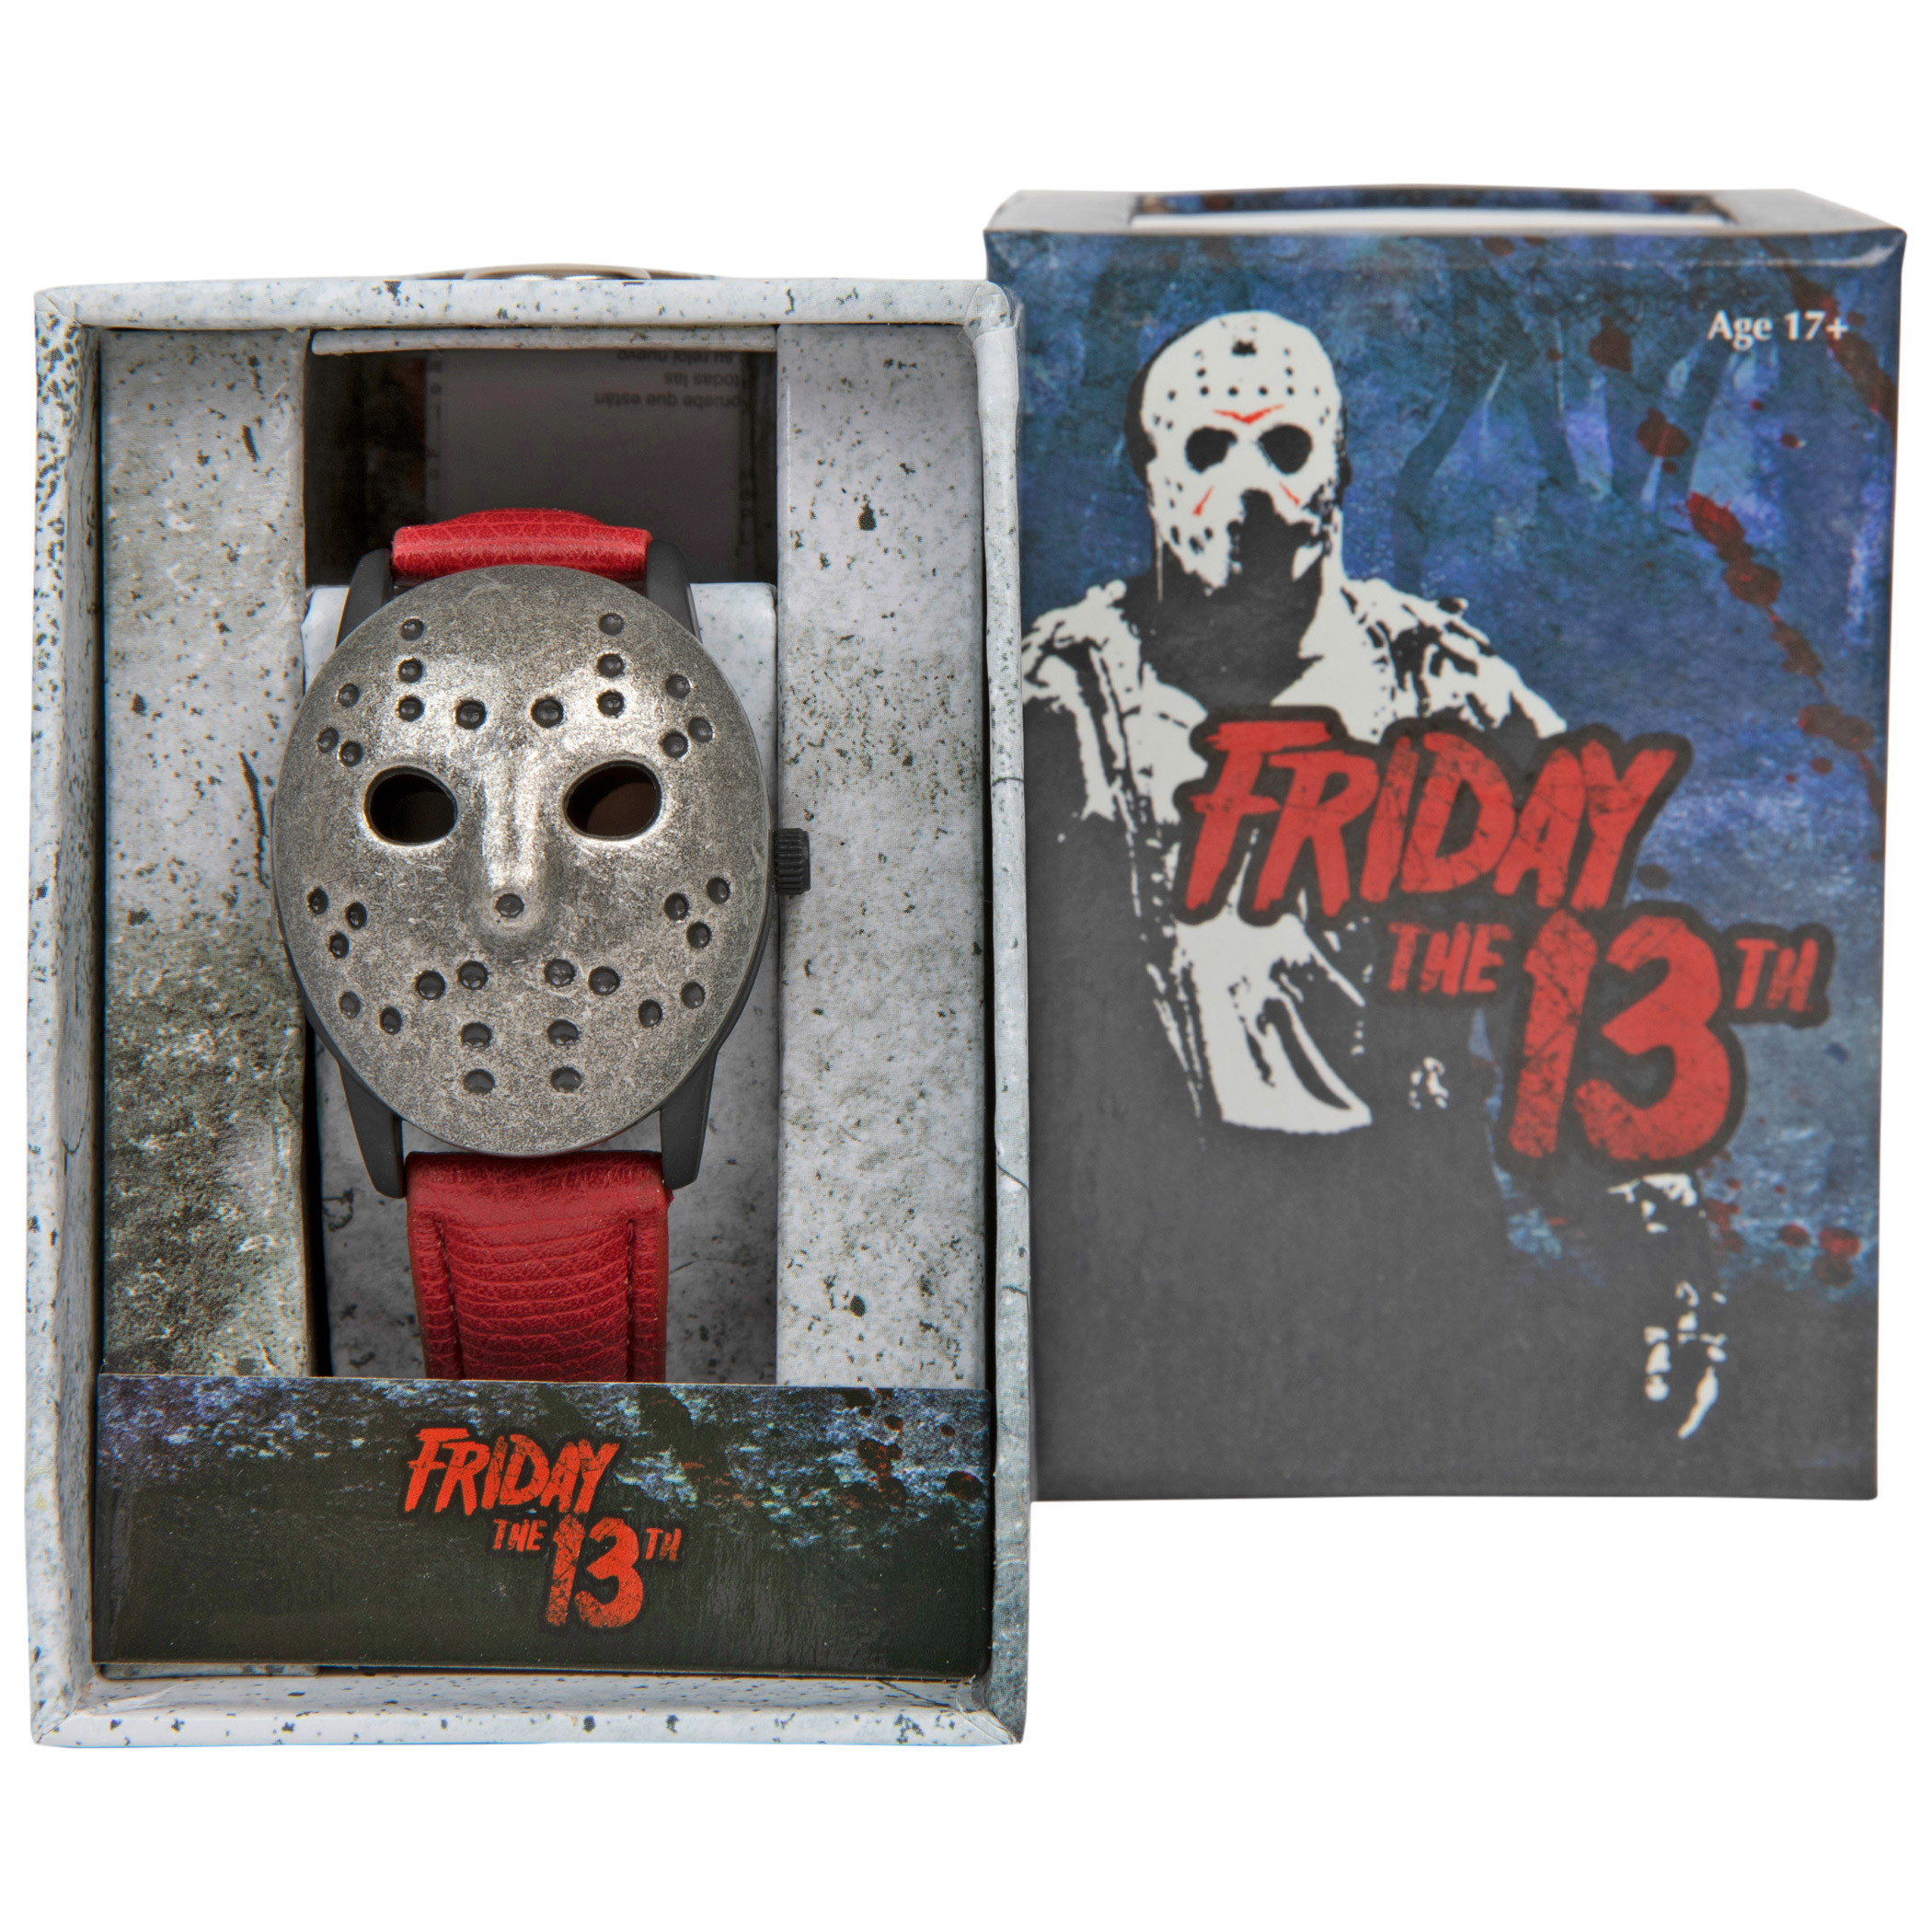 The Punisher Jason Voorhees Mask